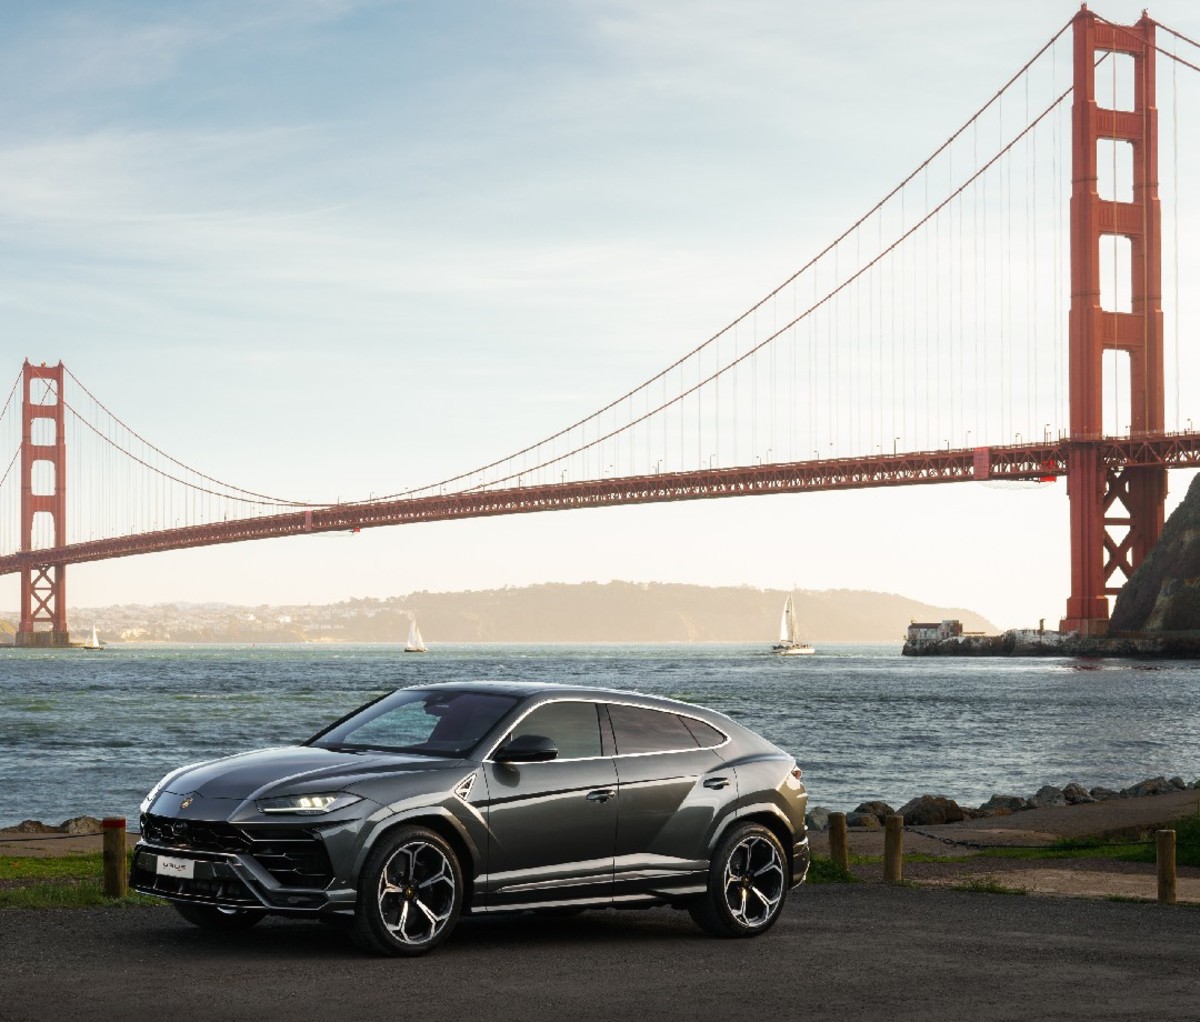 Black 2021 Lamborghini Urus parked by San Francisco Bay with Golden Gate Bridge in the background